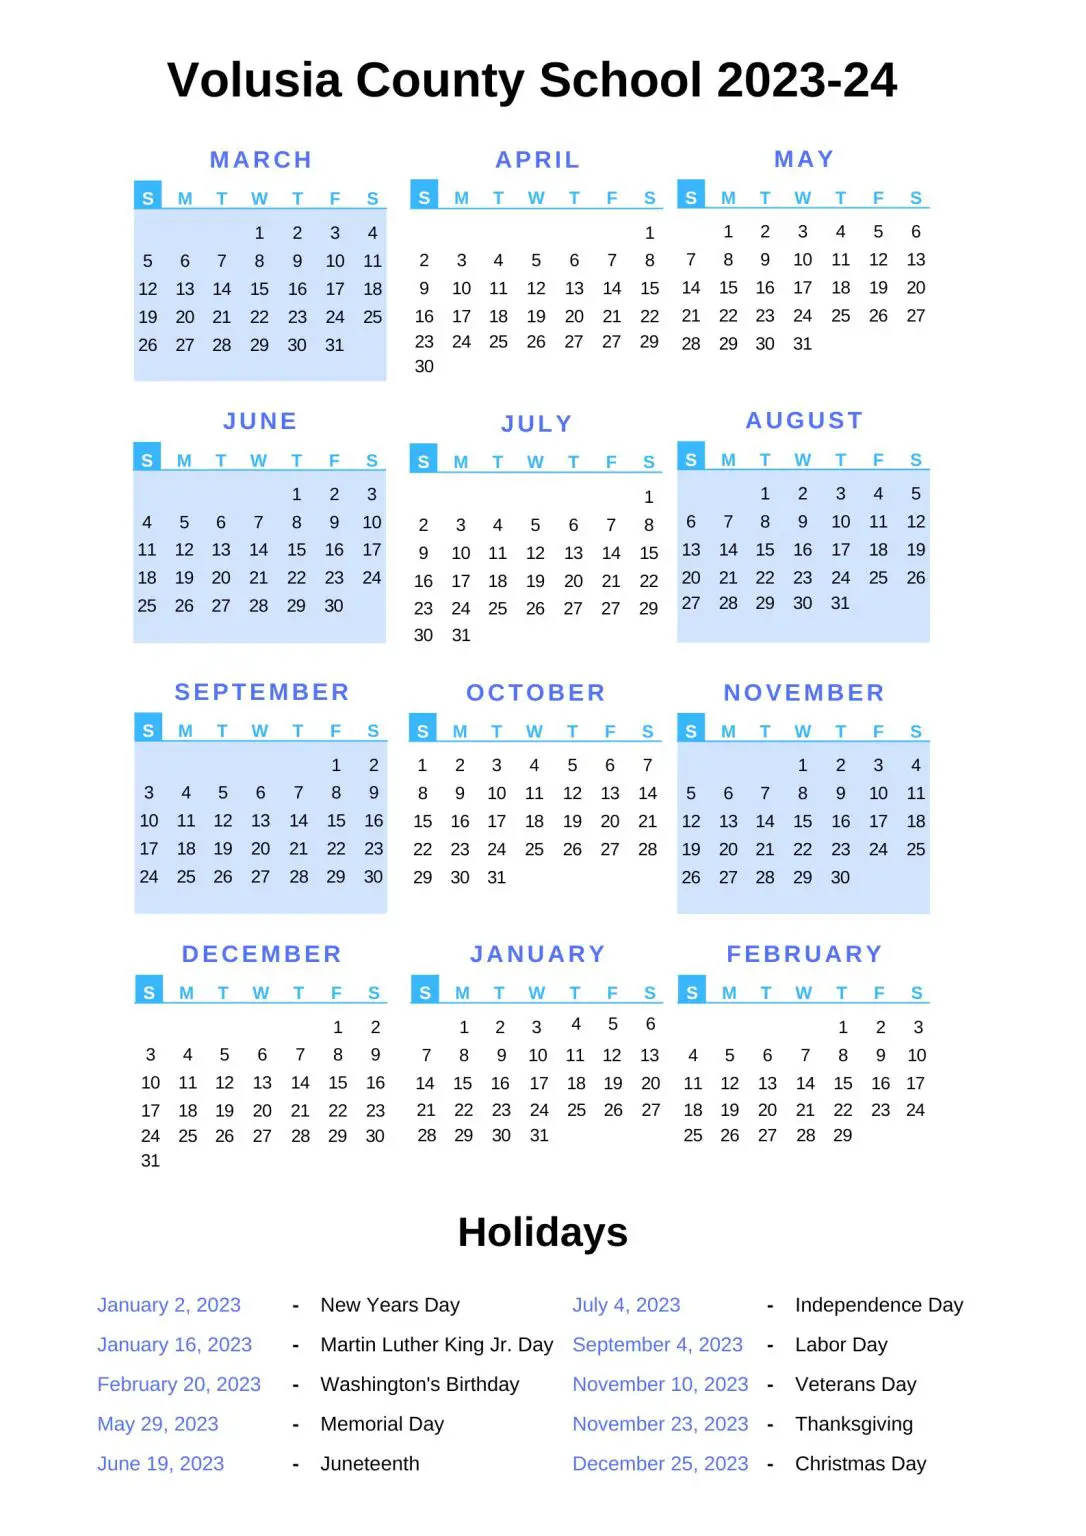 Volusia County School Calendar (2022 2023) with Holidays